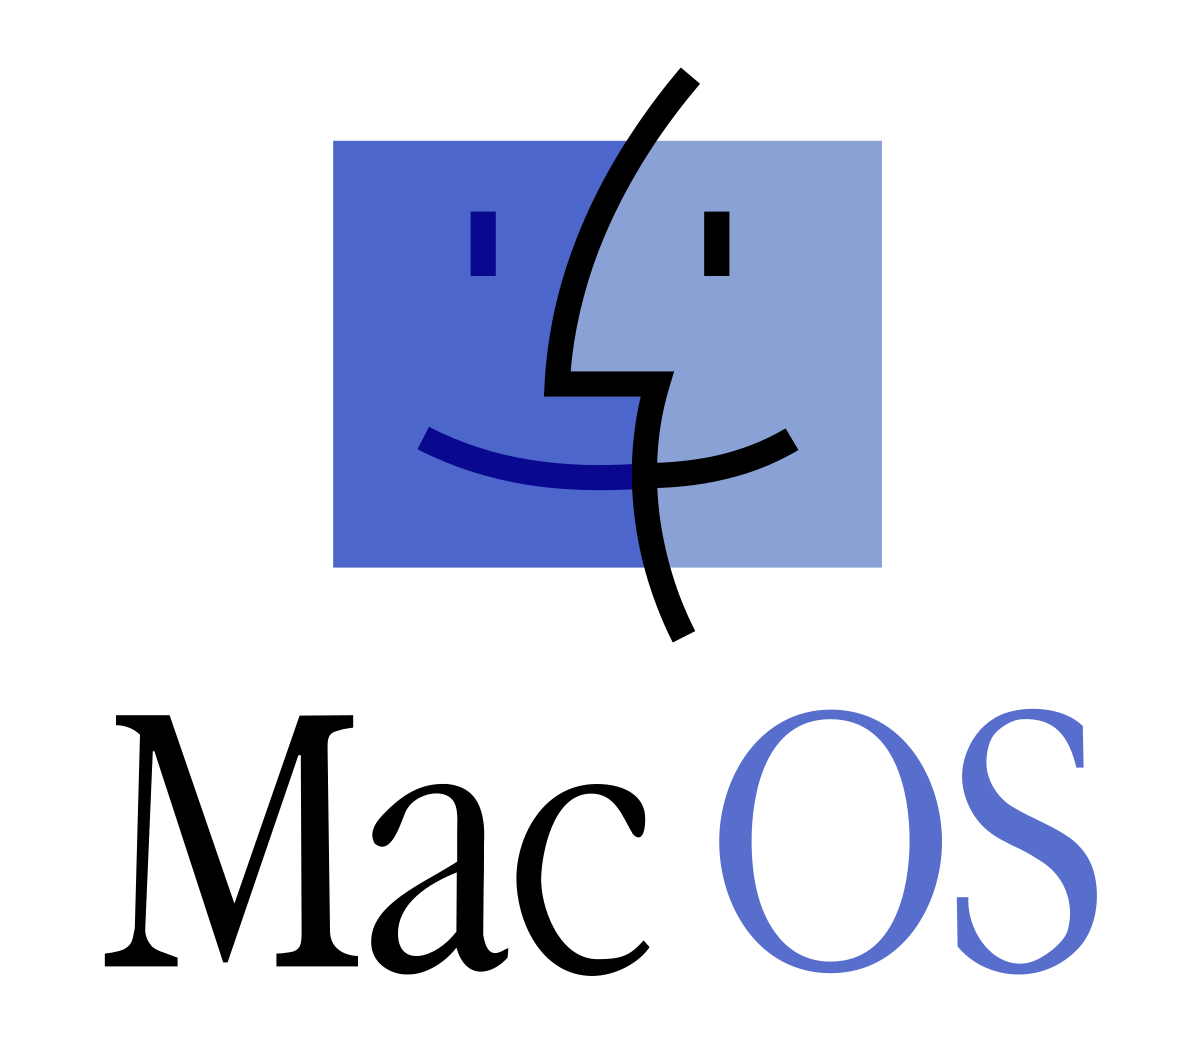 What is the latest mac os software